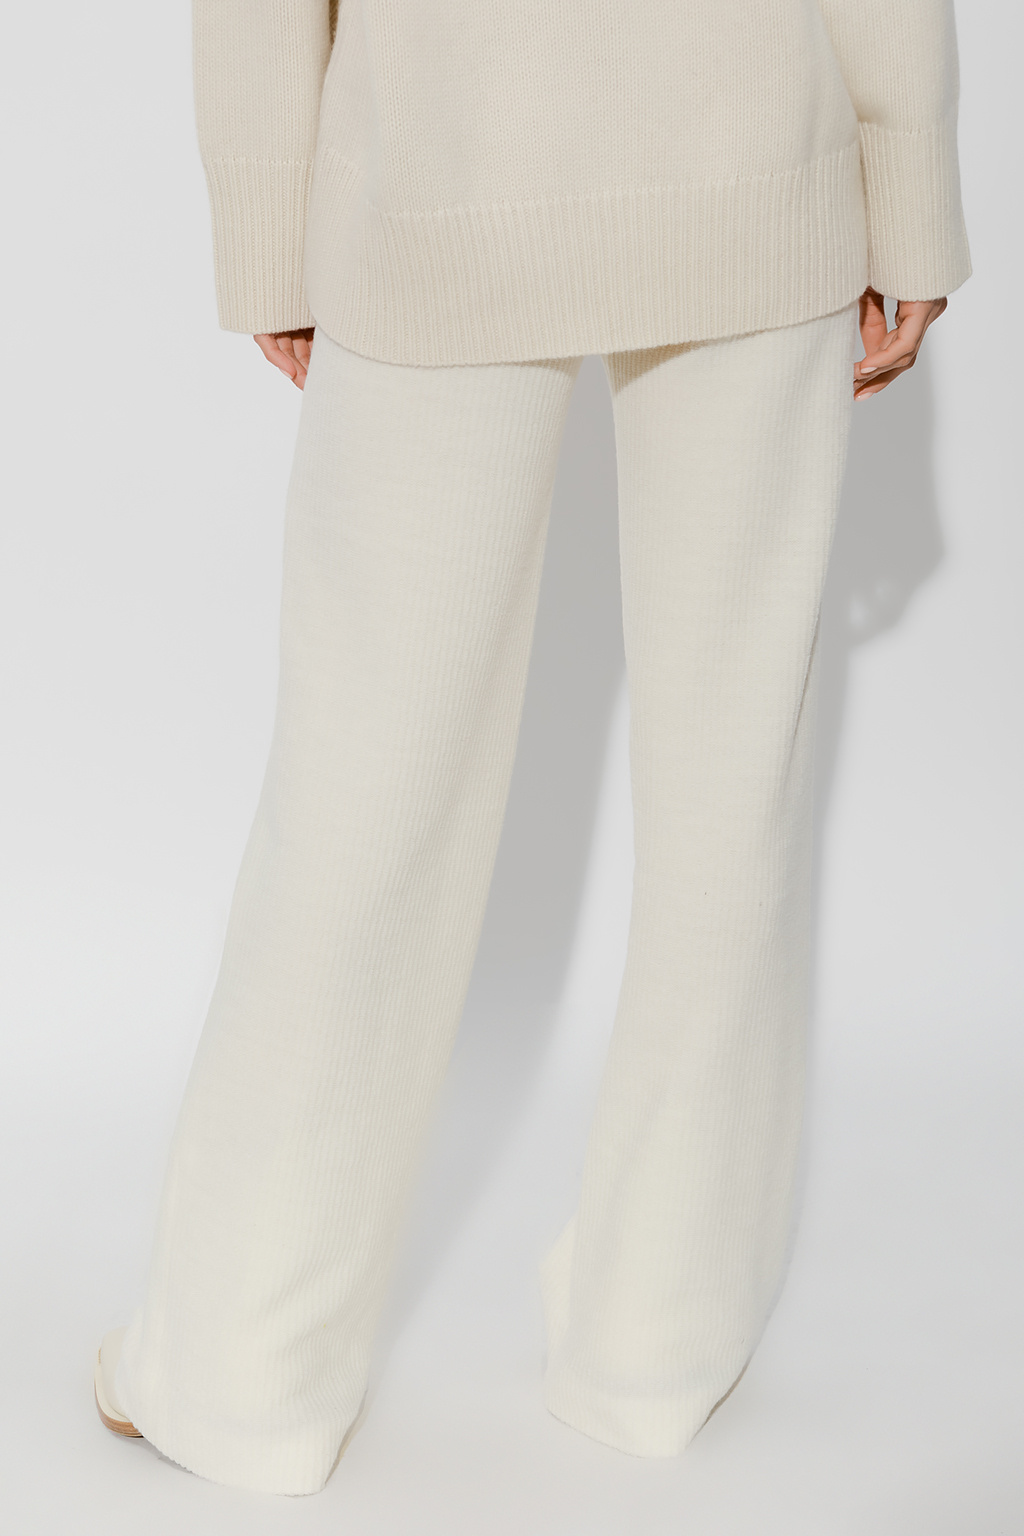 Chloé Flared jeans trousers